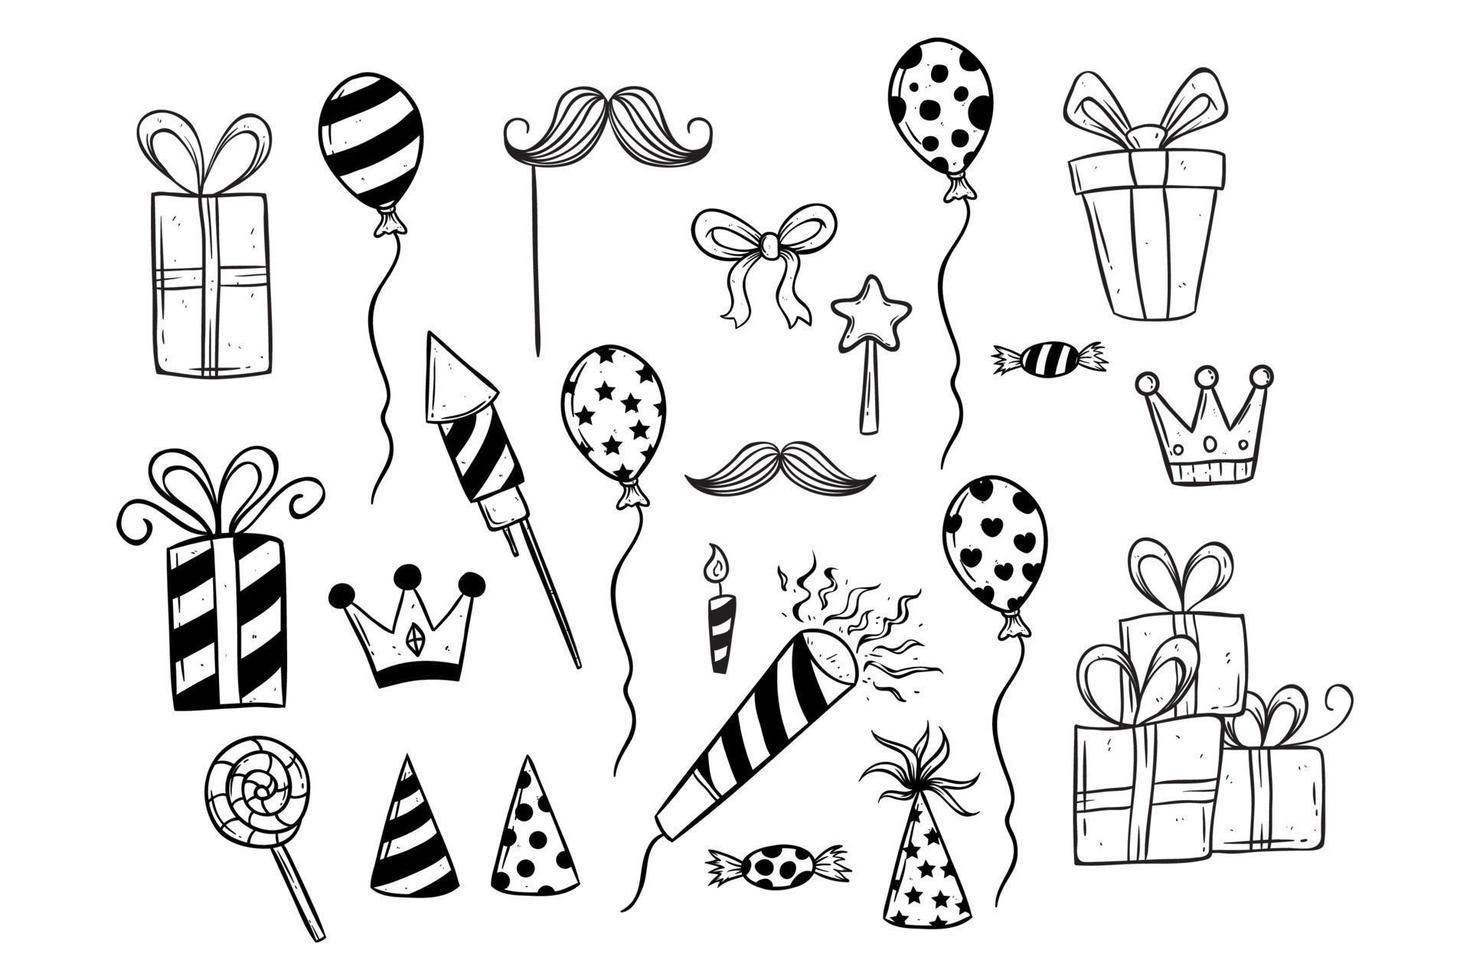 doodle birthday icons or elements collection on white background vector